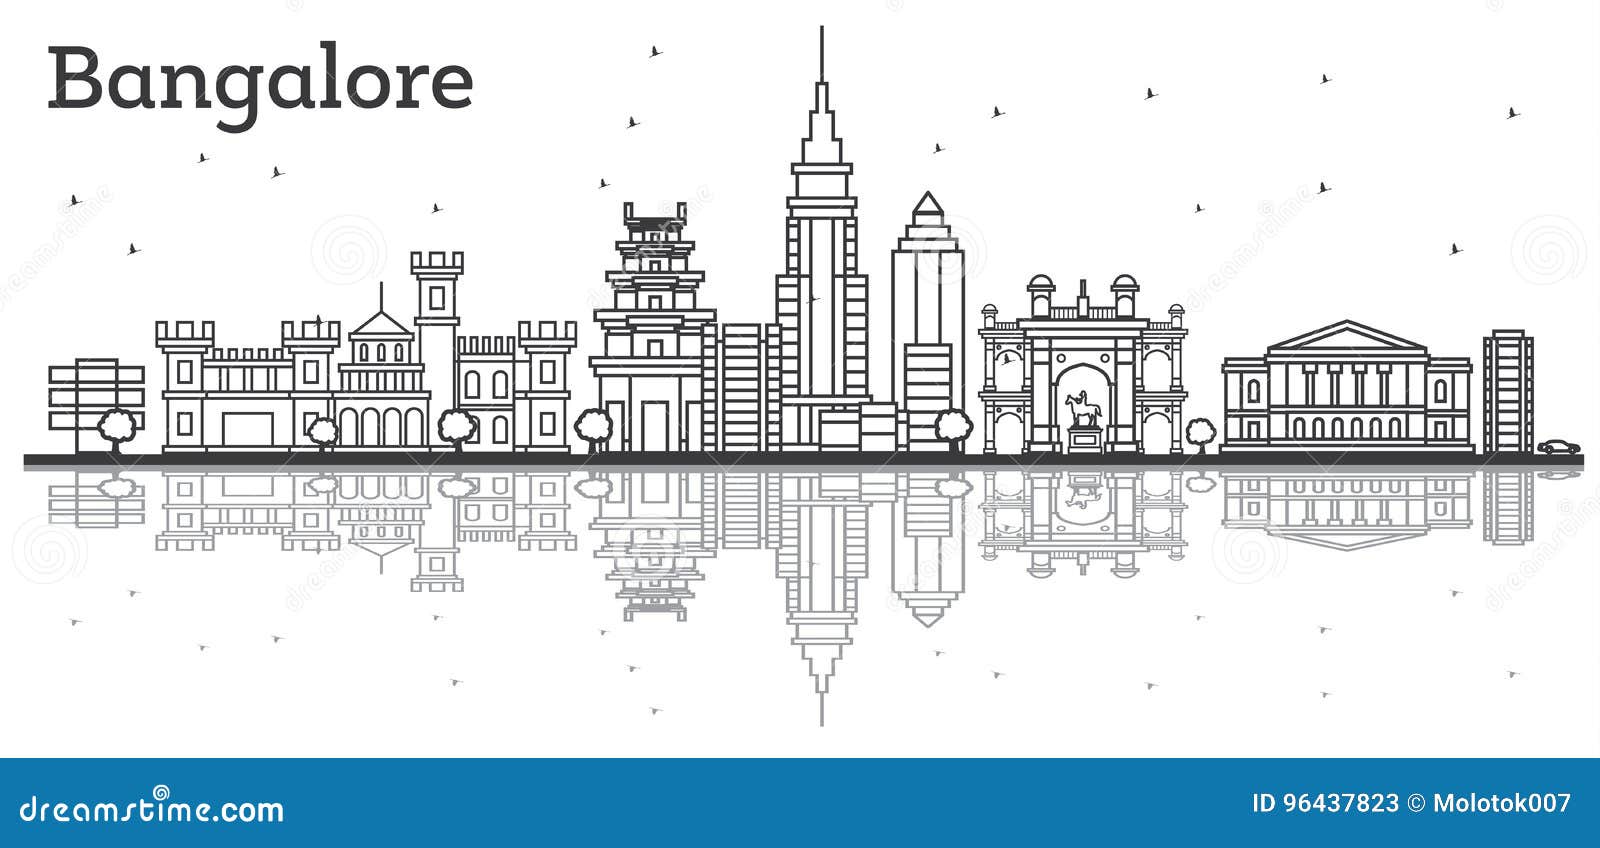 outline bangalore skyline with historic buildings and reflection